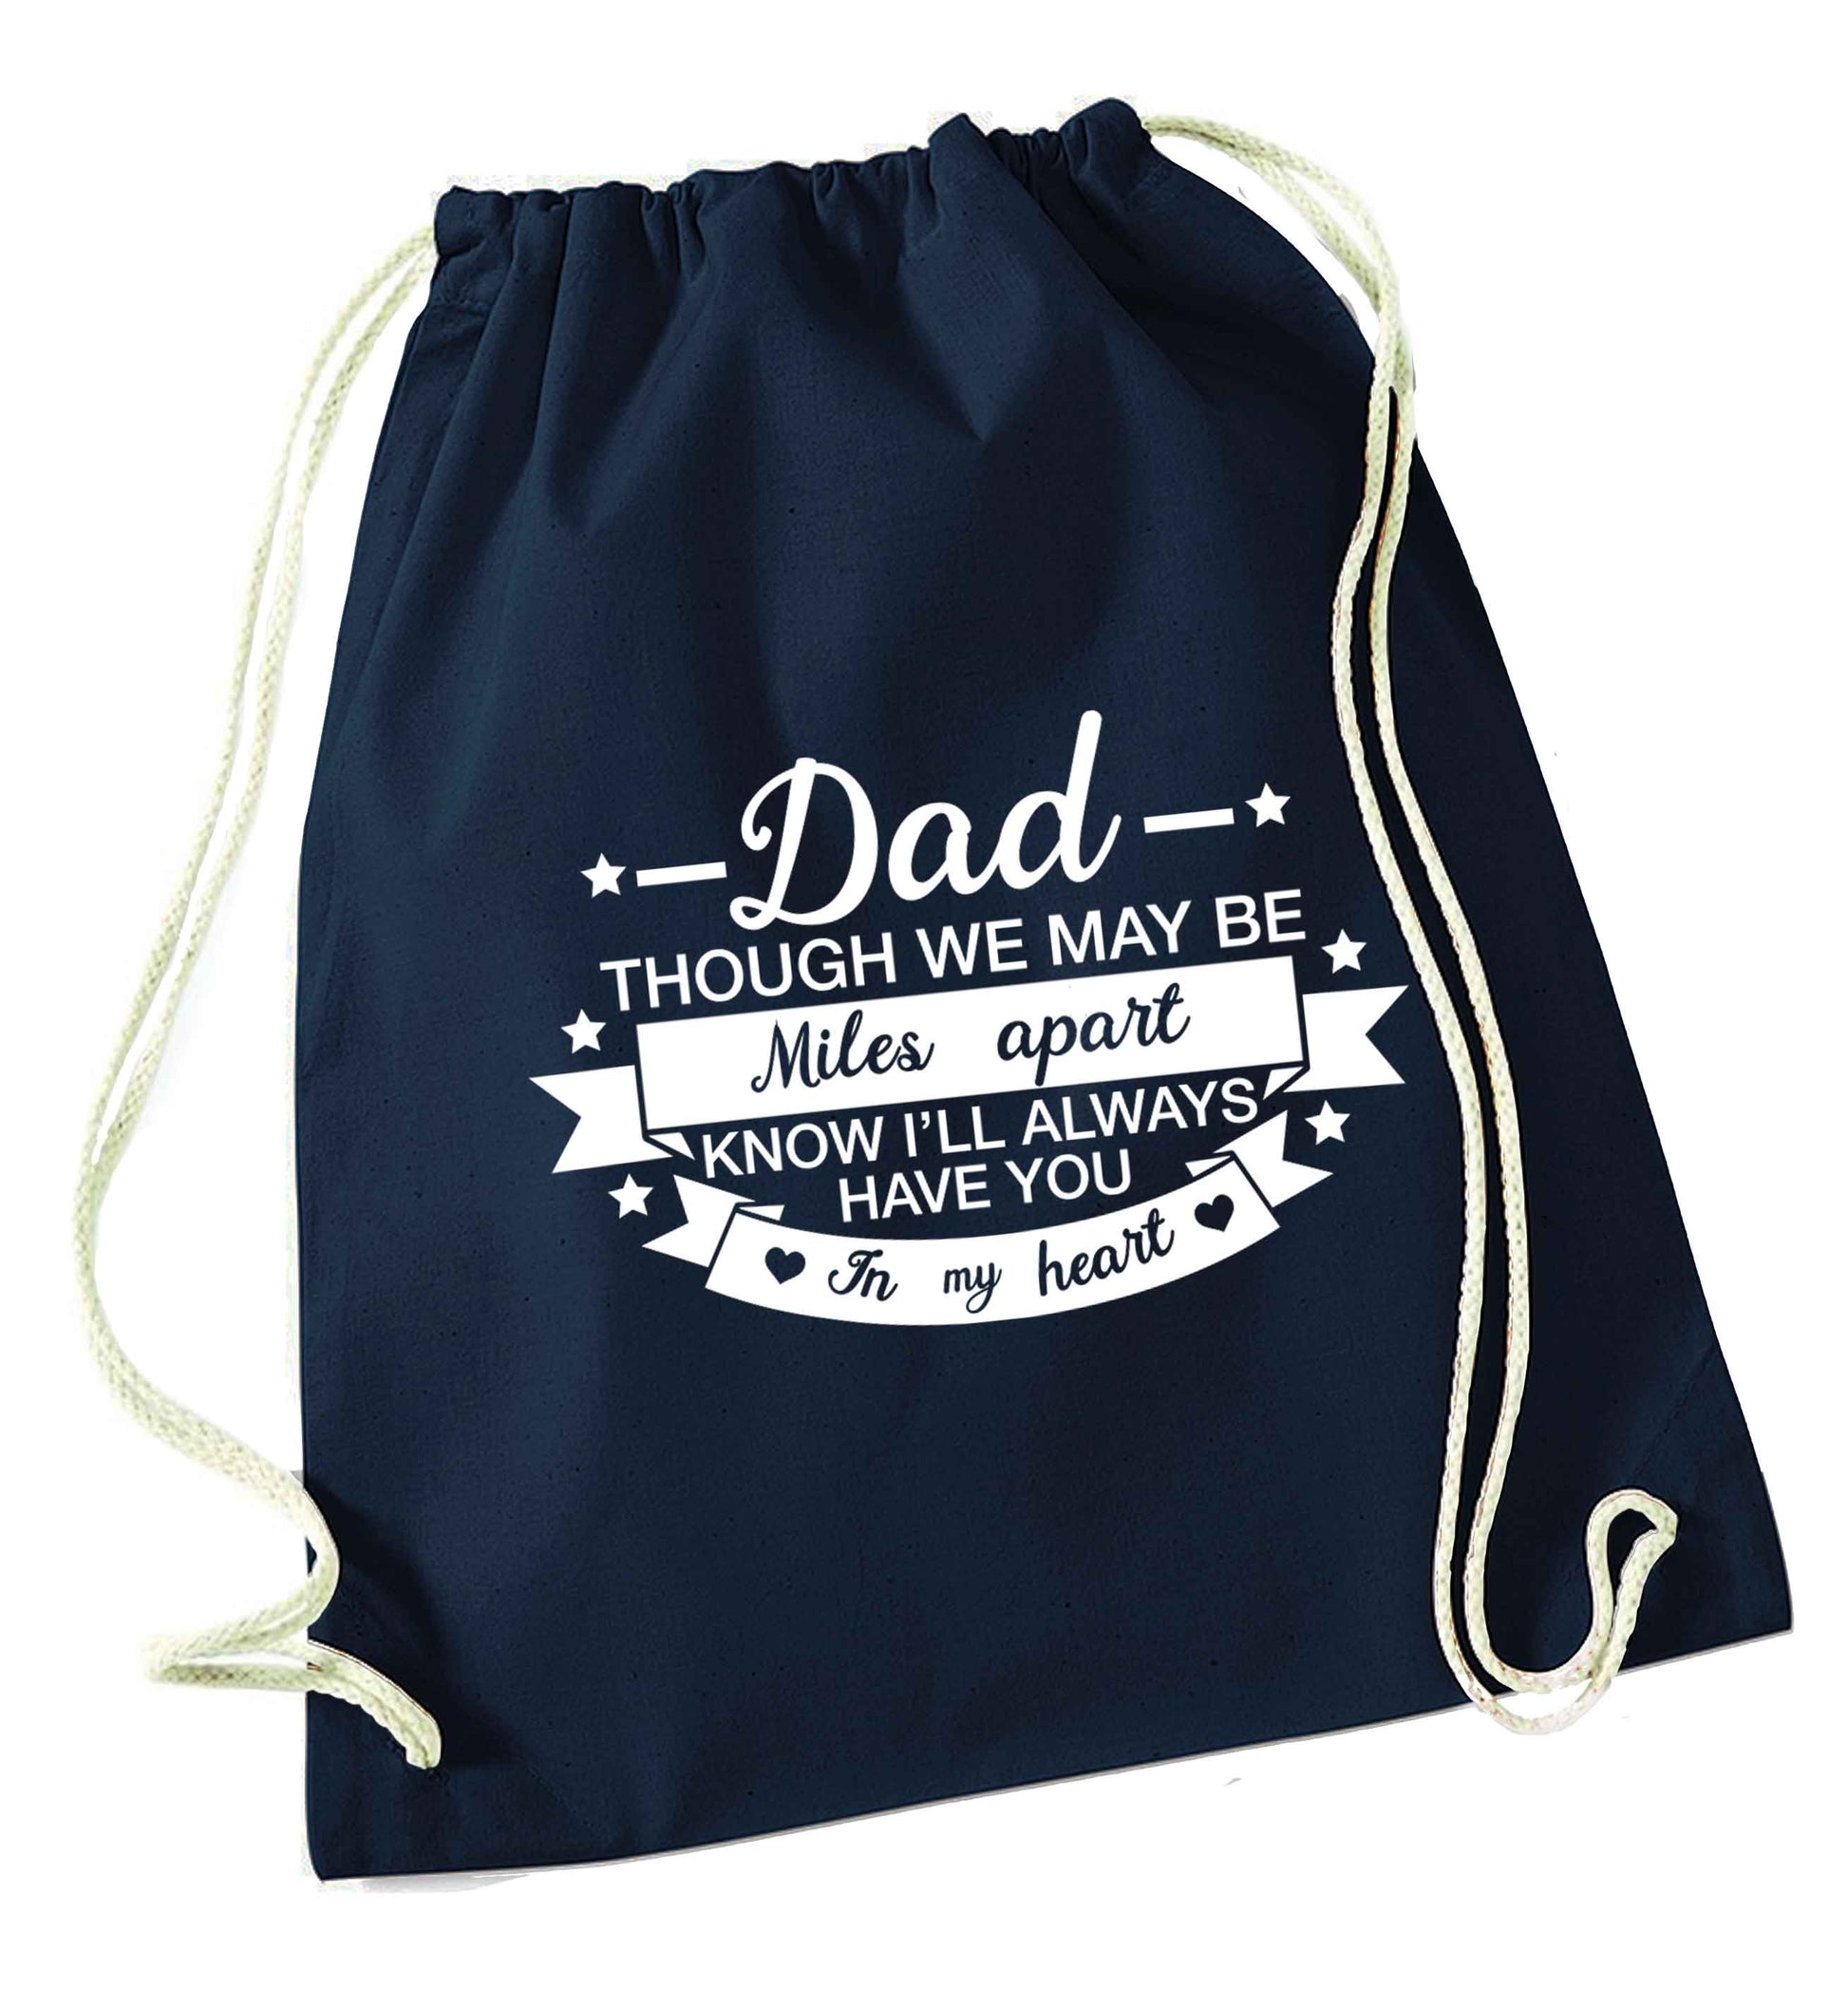 Dad though we are miles apart know I'll always have you in my heart navy drawstring bag